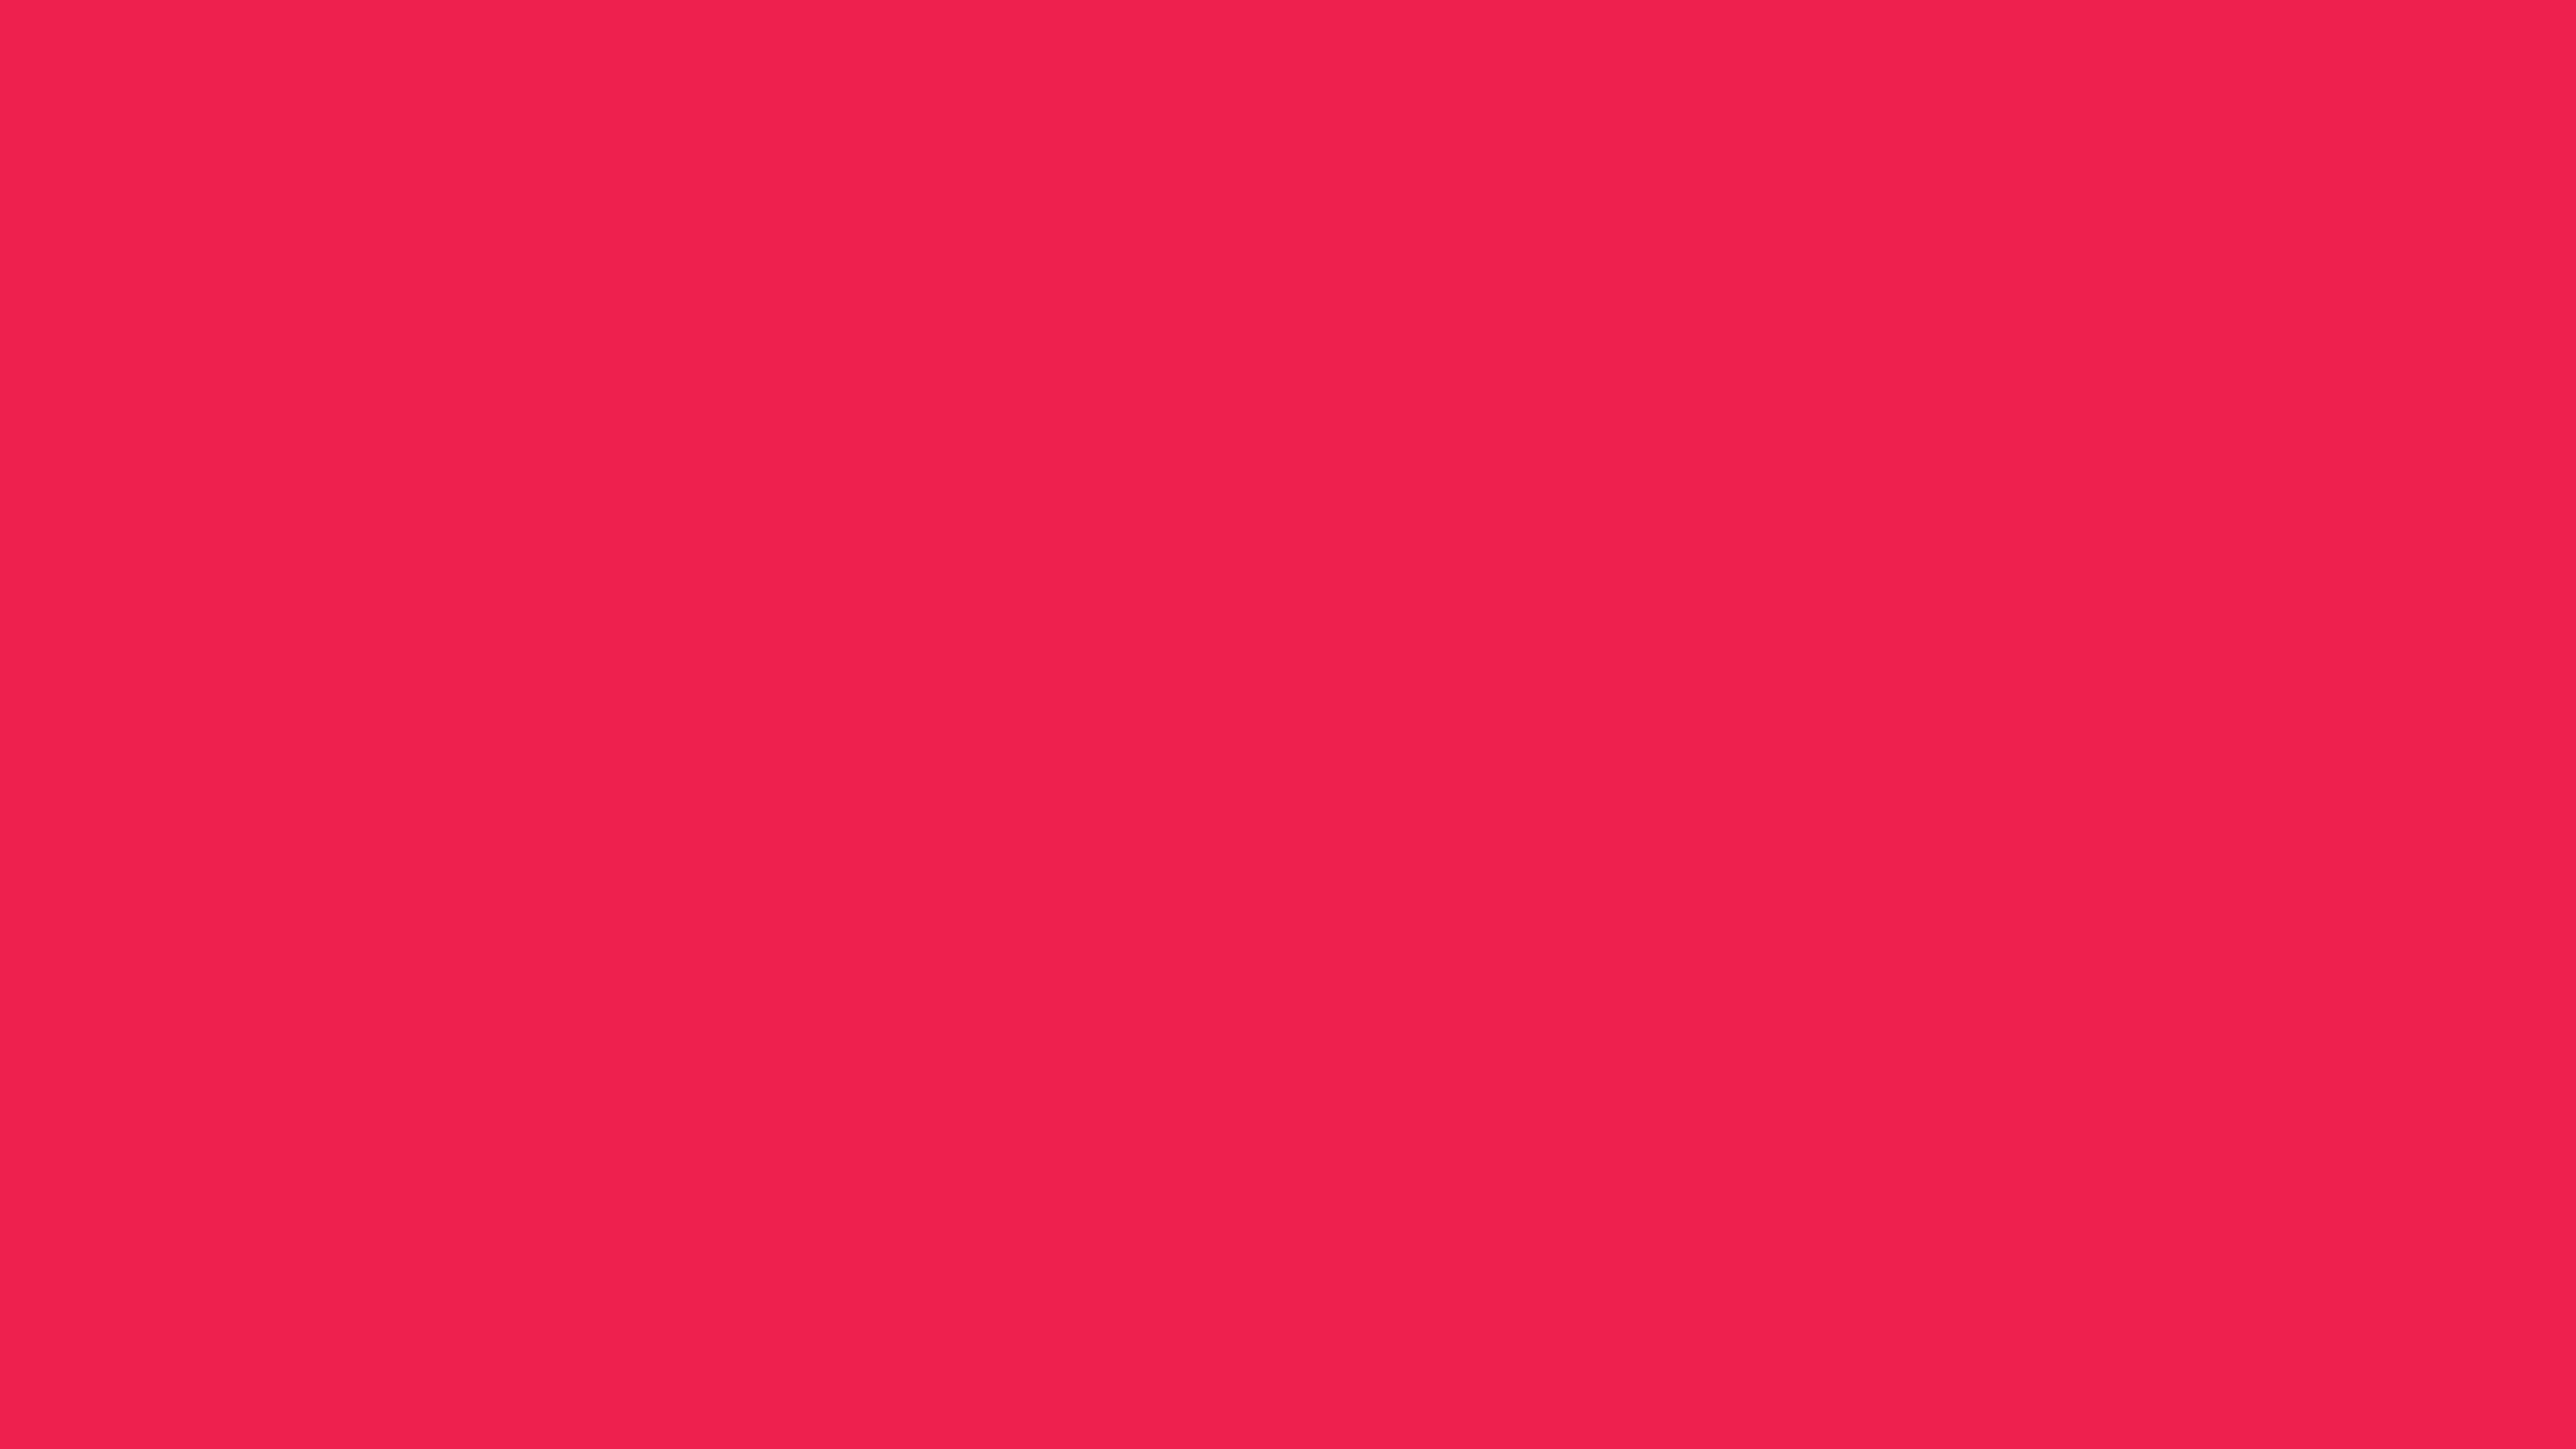 5120x2880 Red Crayola Solid Color Background